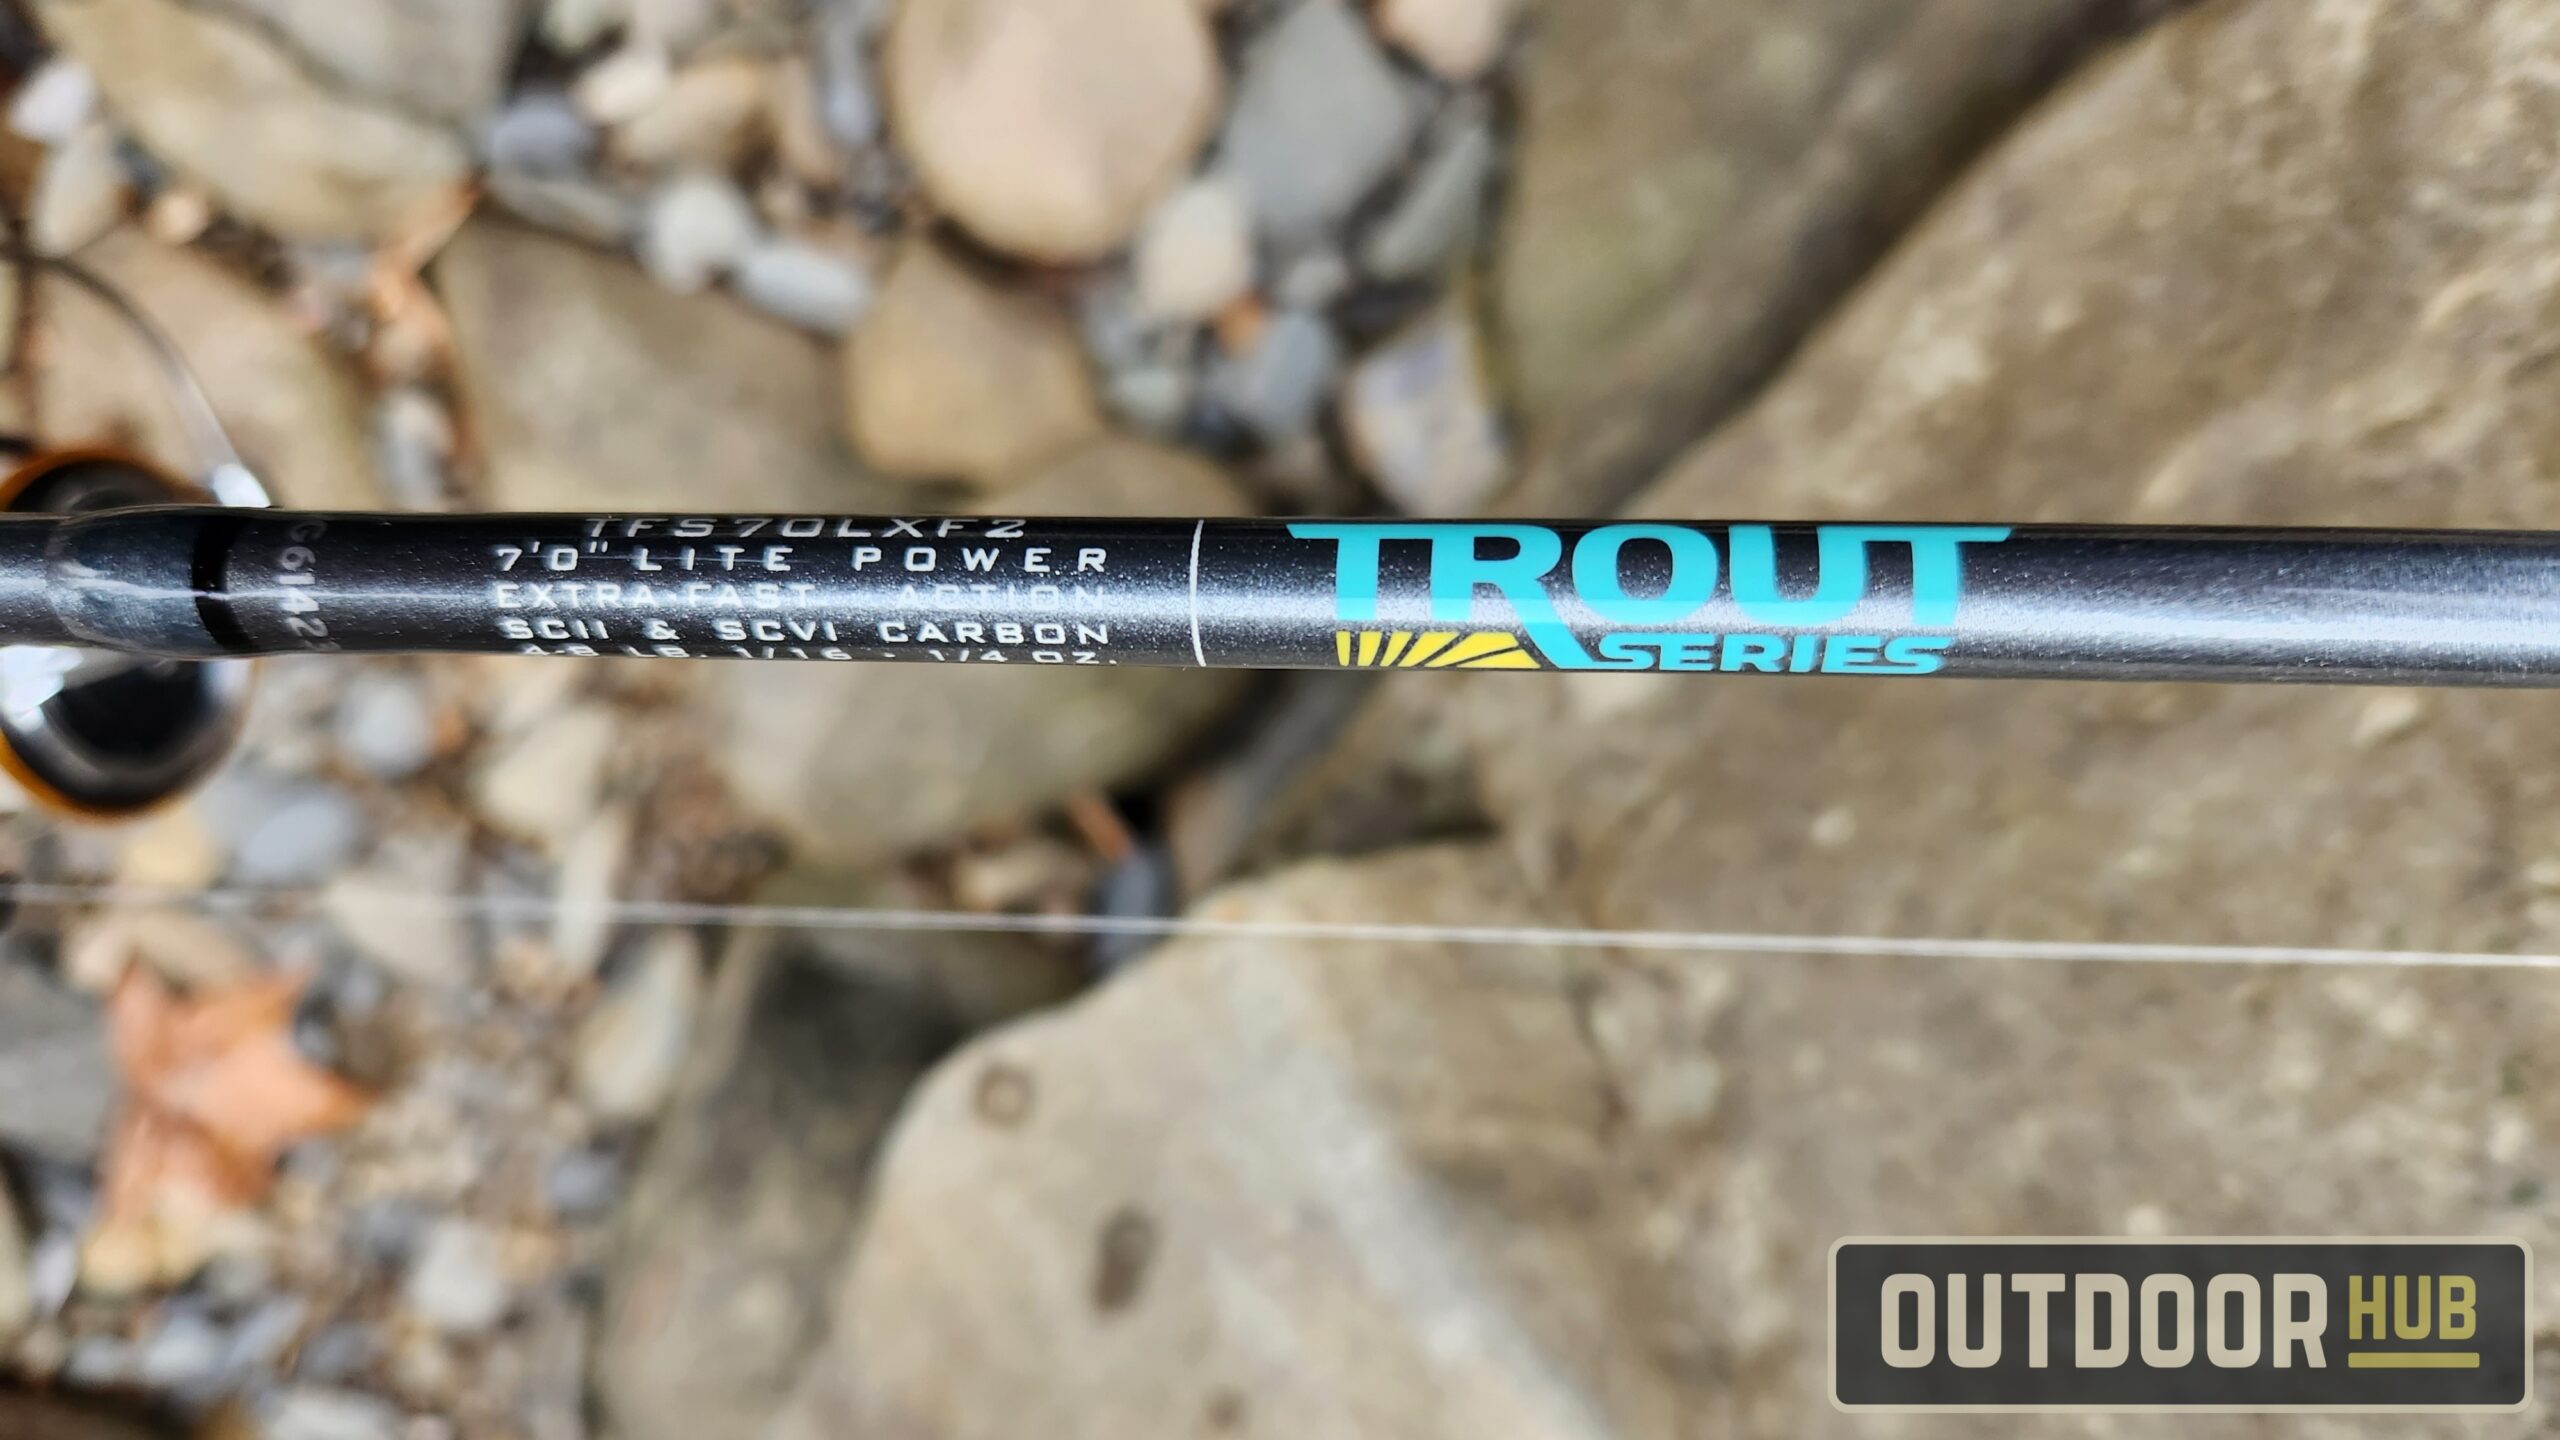 St. Croix St. Croix Trout Series Spinning Rods